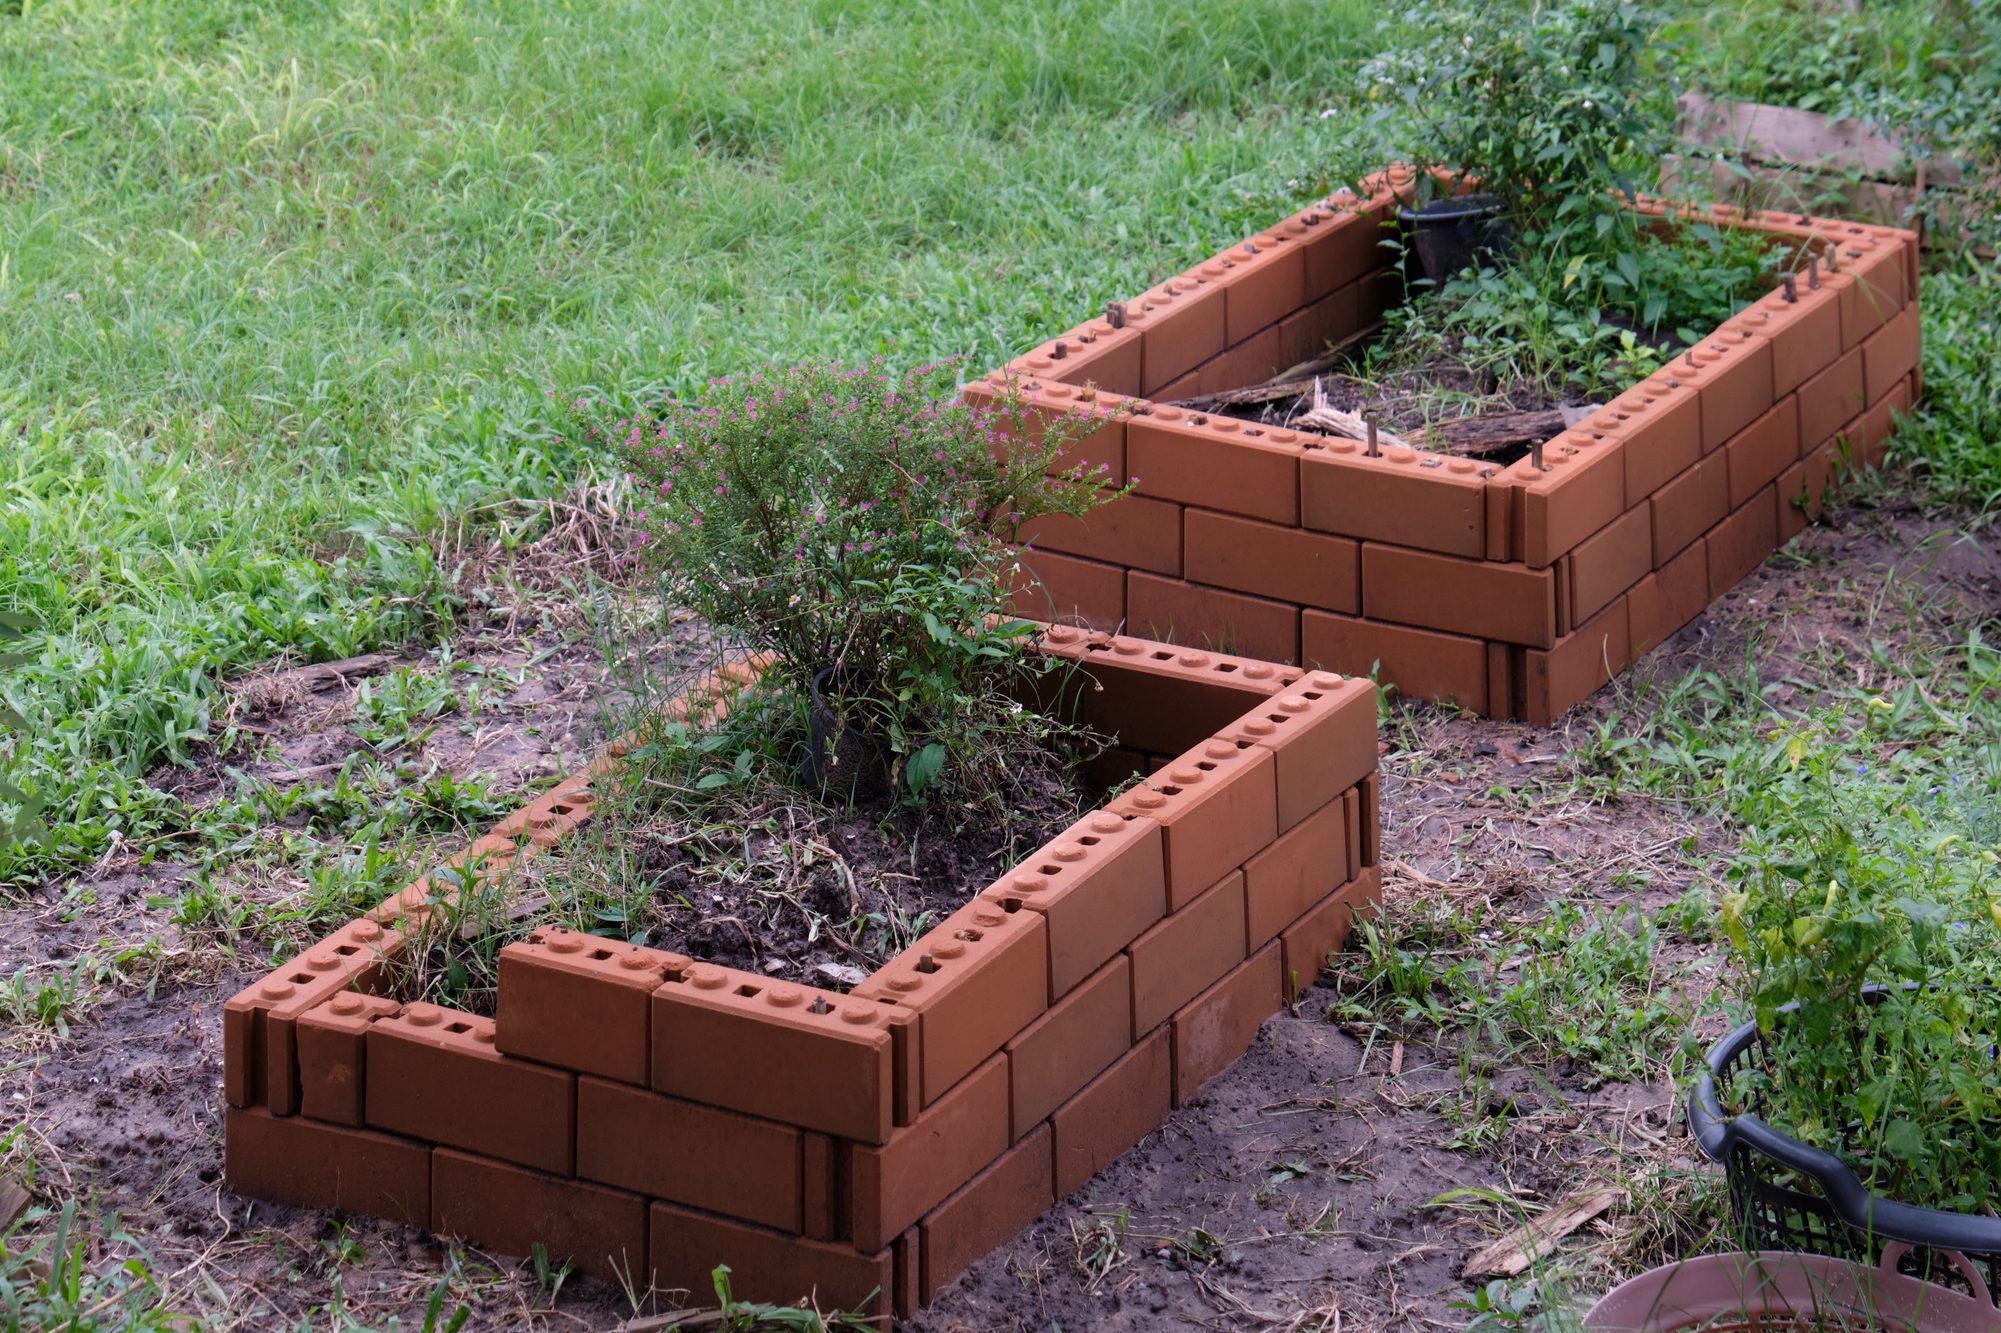 The DIY vegetable bed made from the brick